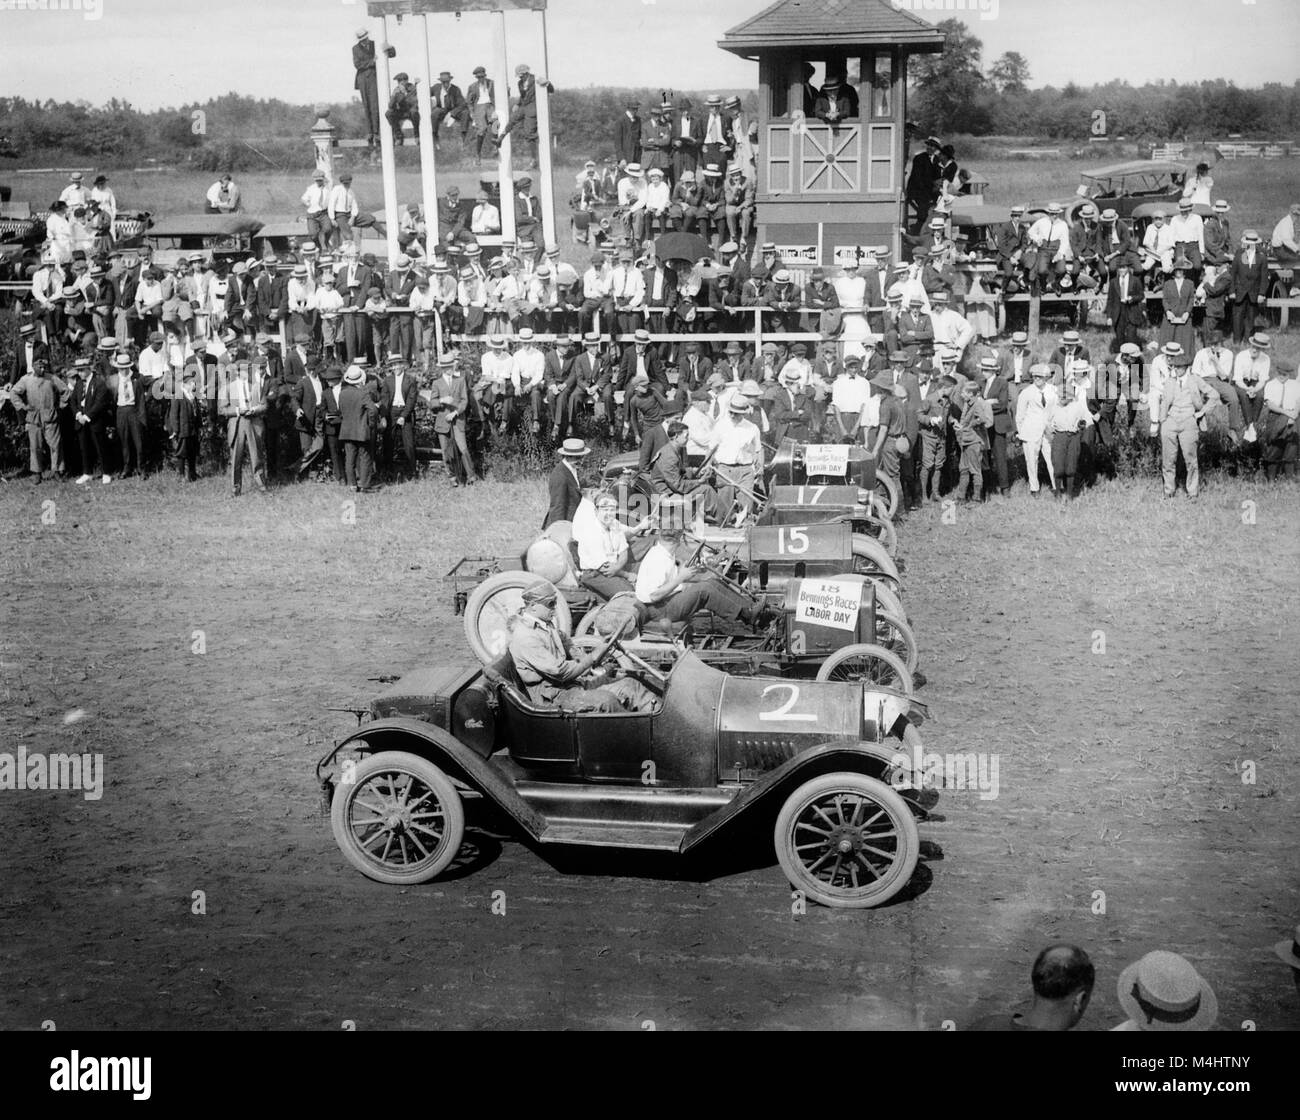 Motor sports, racing car on race track at the start, ca. 1930, 1930s, exact location unknown, USA Stock Photo